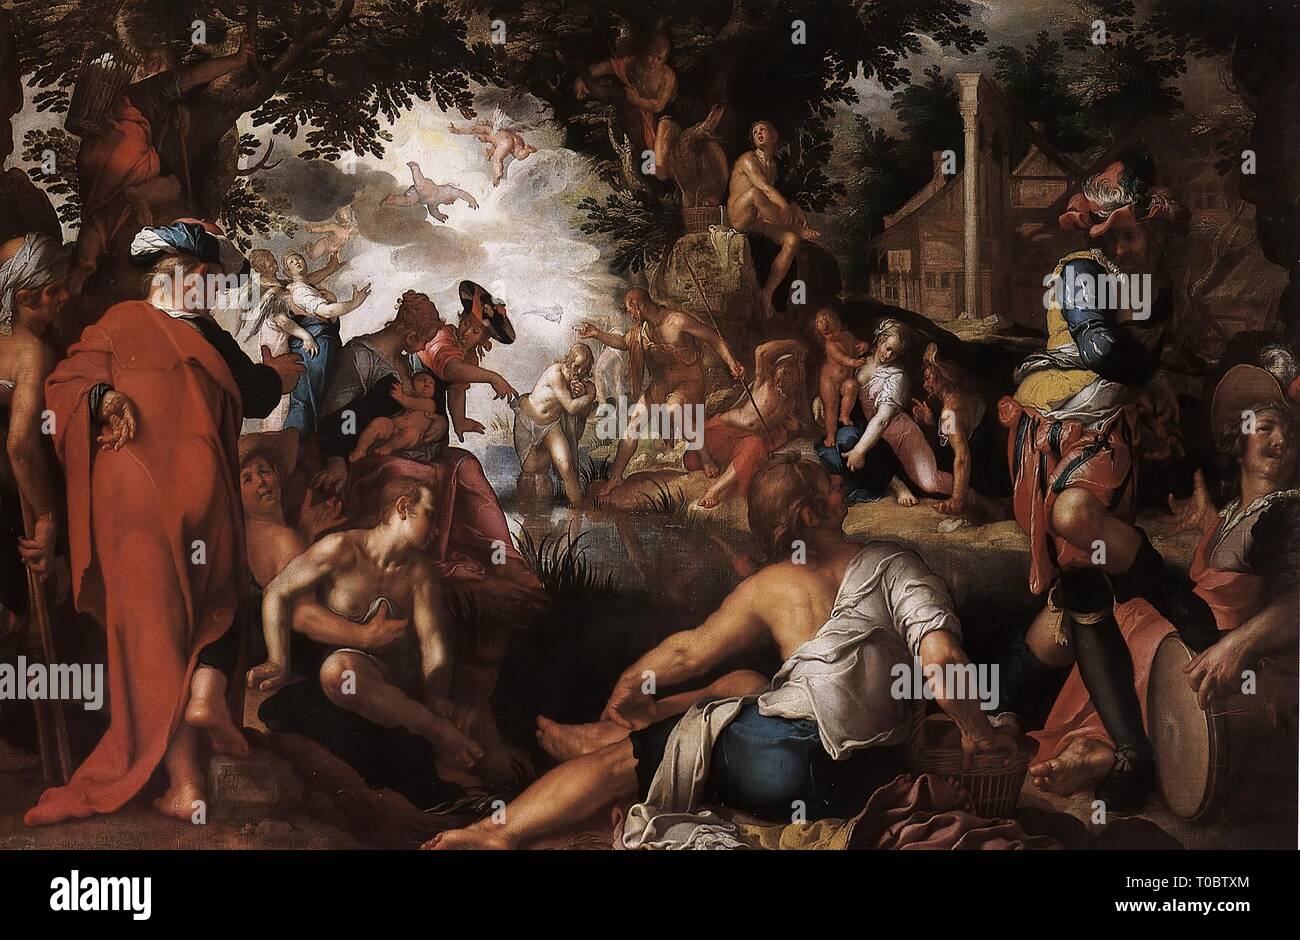 'The Baptism of Christ'. Holland, 17th century. Dimensions: 92x146,5 cm. Museum: State Hermitage, St. Petersburg. Author: JOACHIM WTEWAEL. Stock Photo